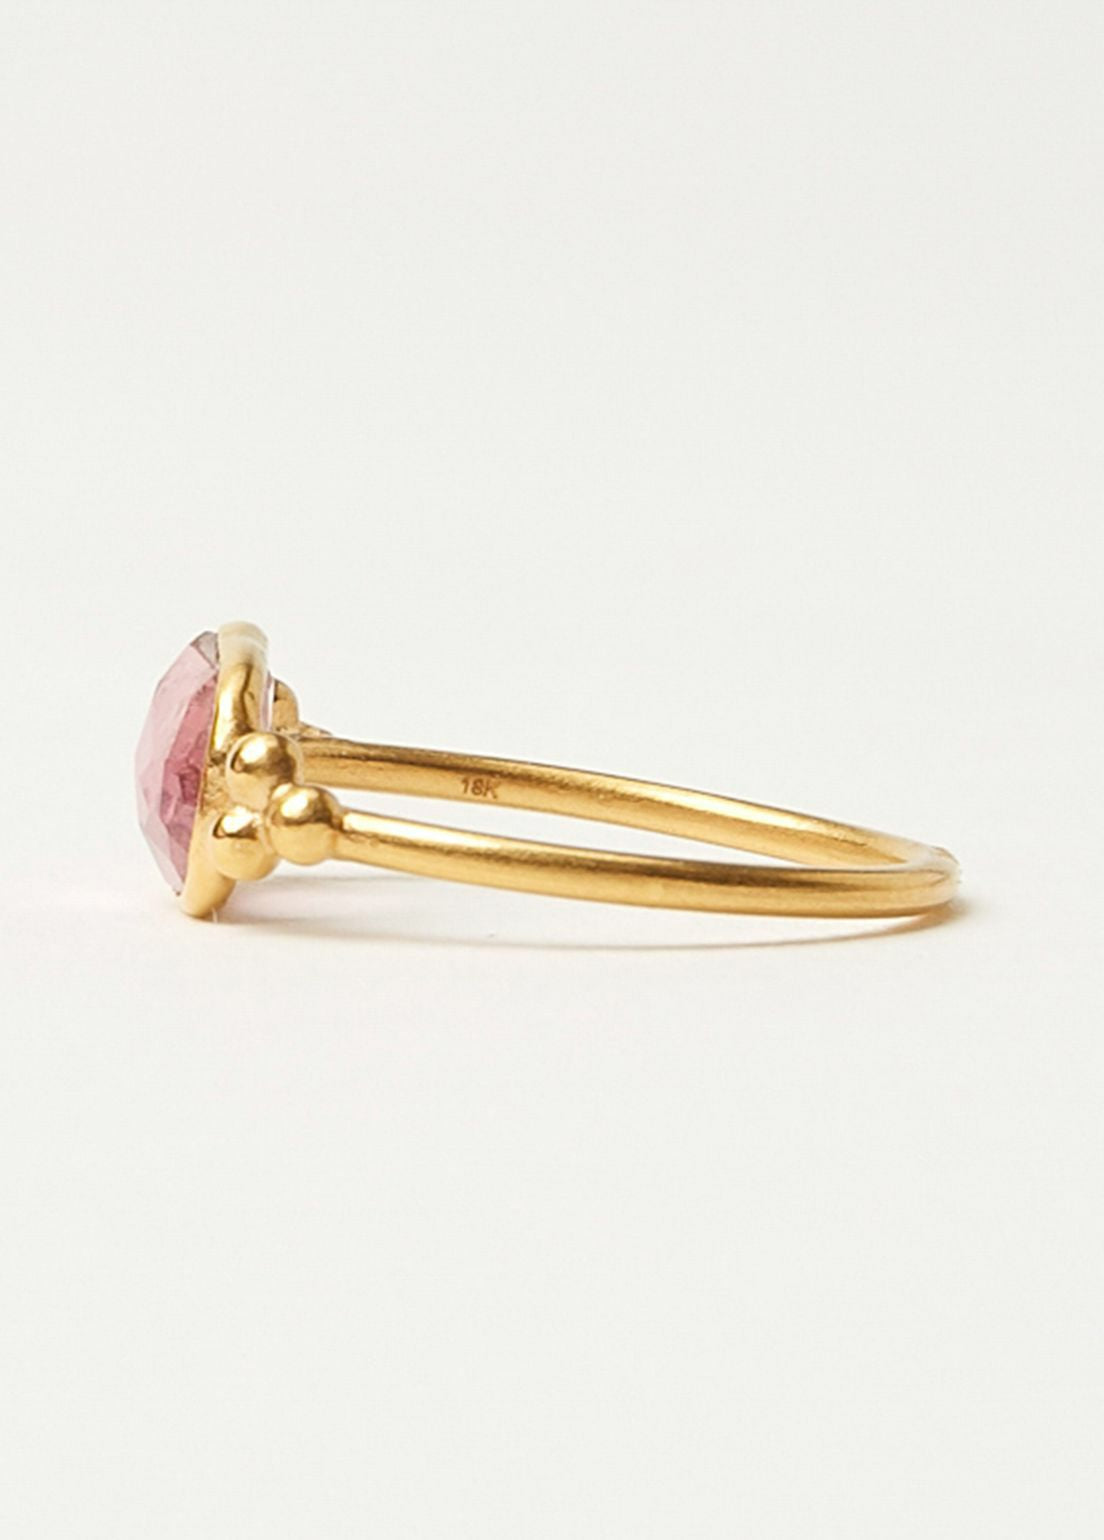 Rubellite Tourmaline Stone and Gold Bead Ring